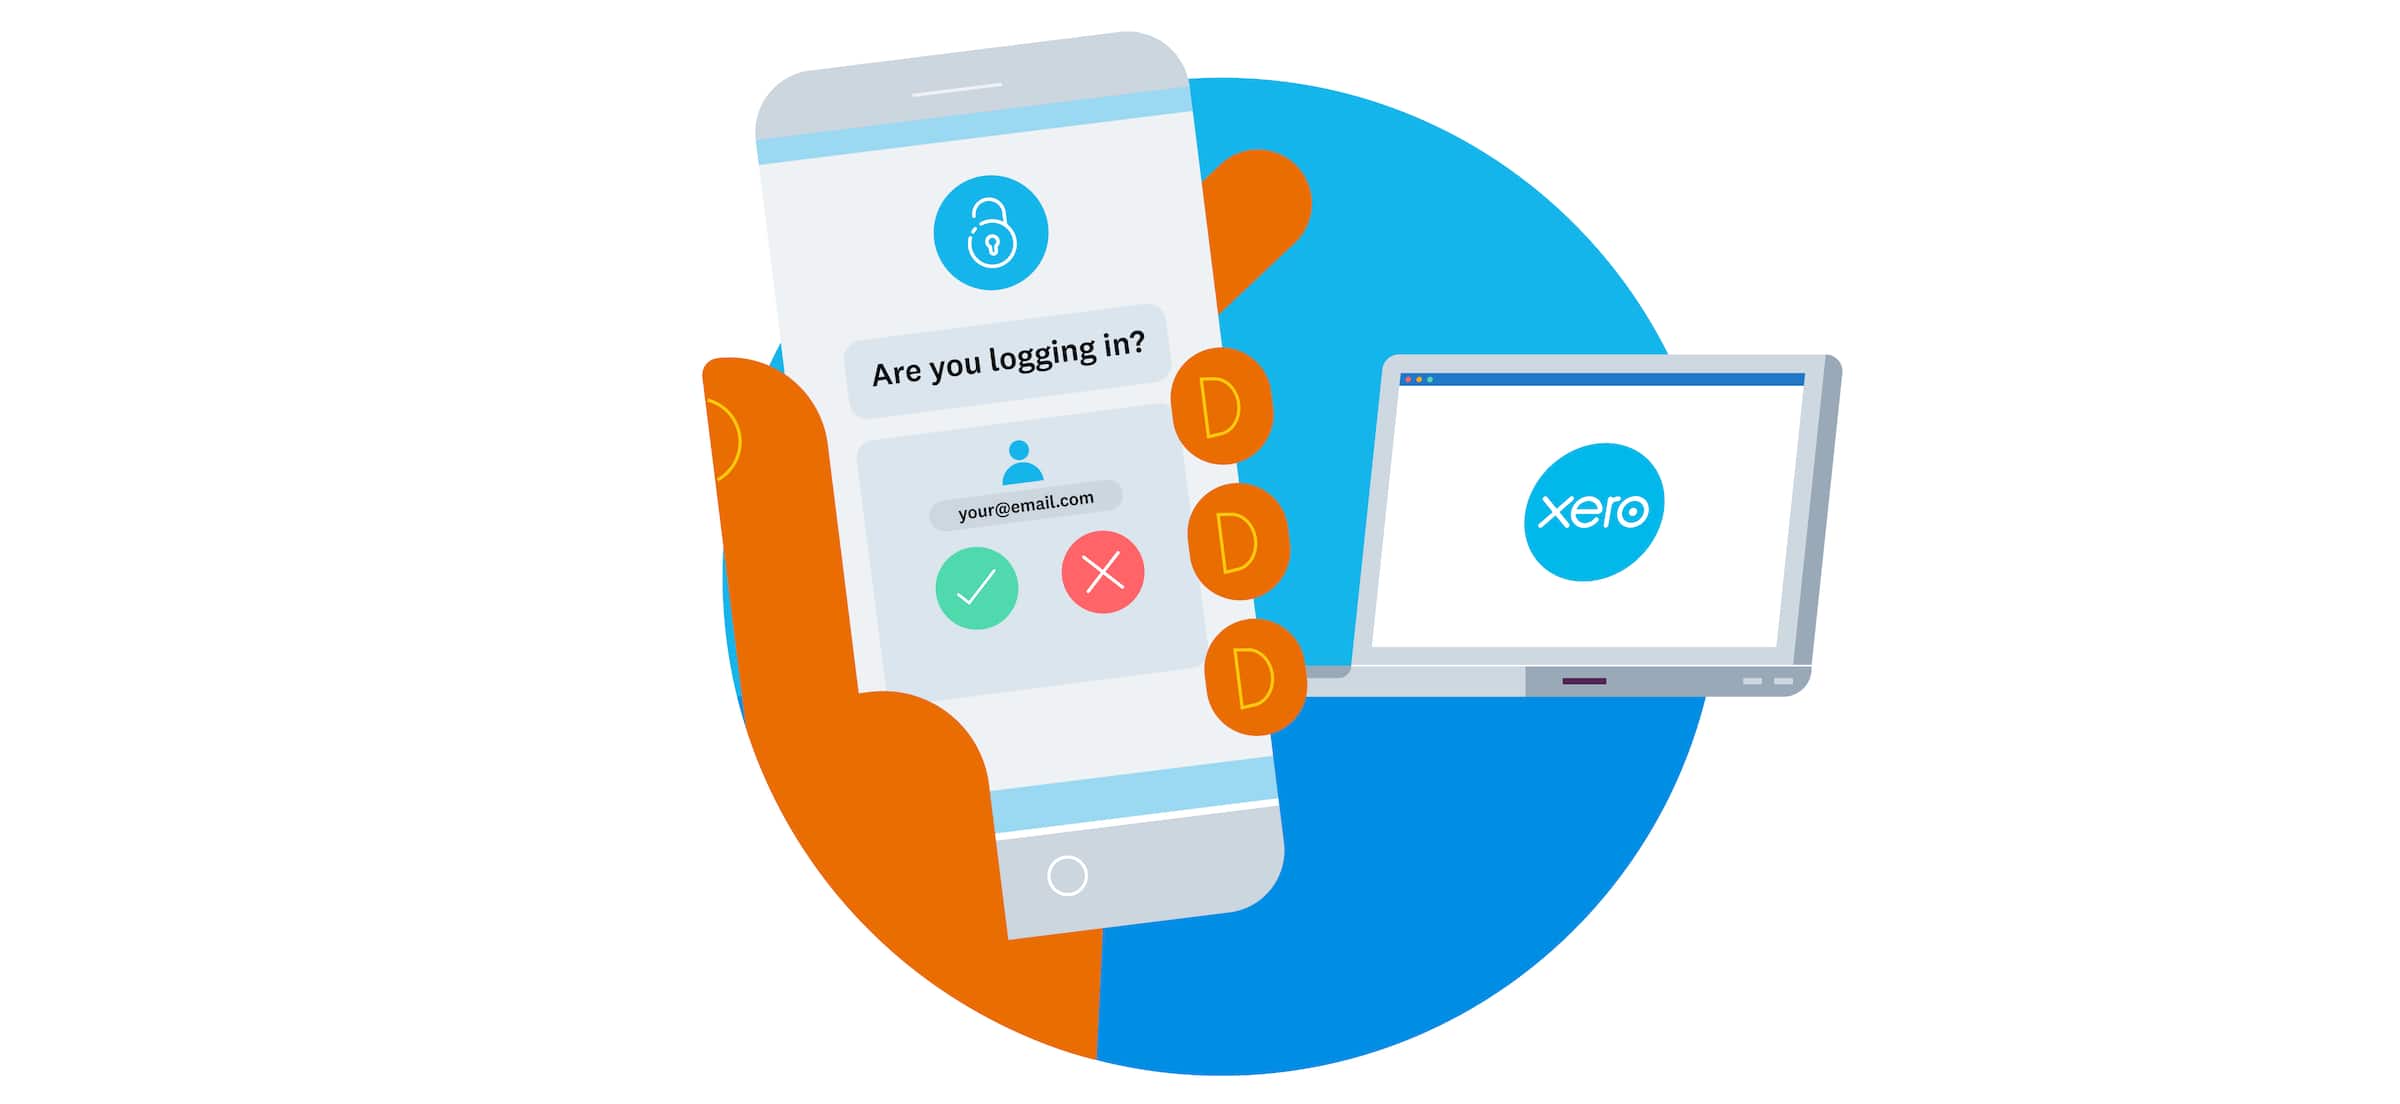 Xero adds MFA as a second layer of security. You’ll get notified on your mobile phone when you log in to Xero. 